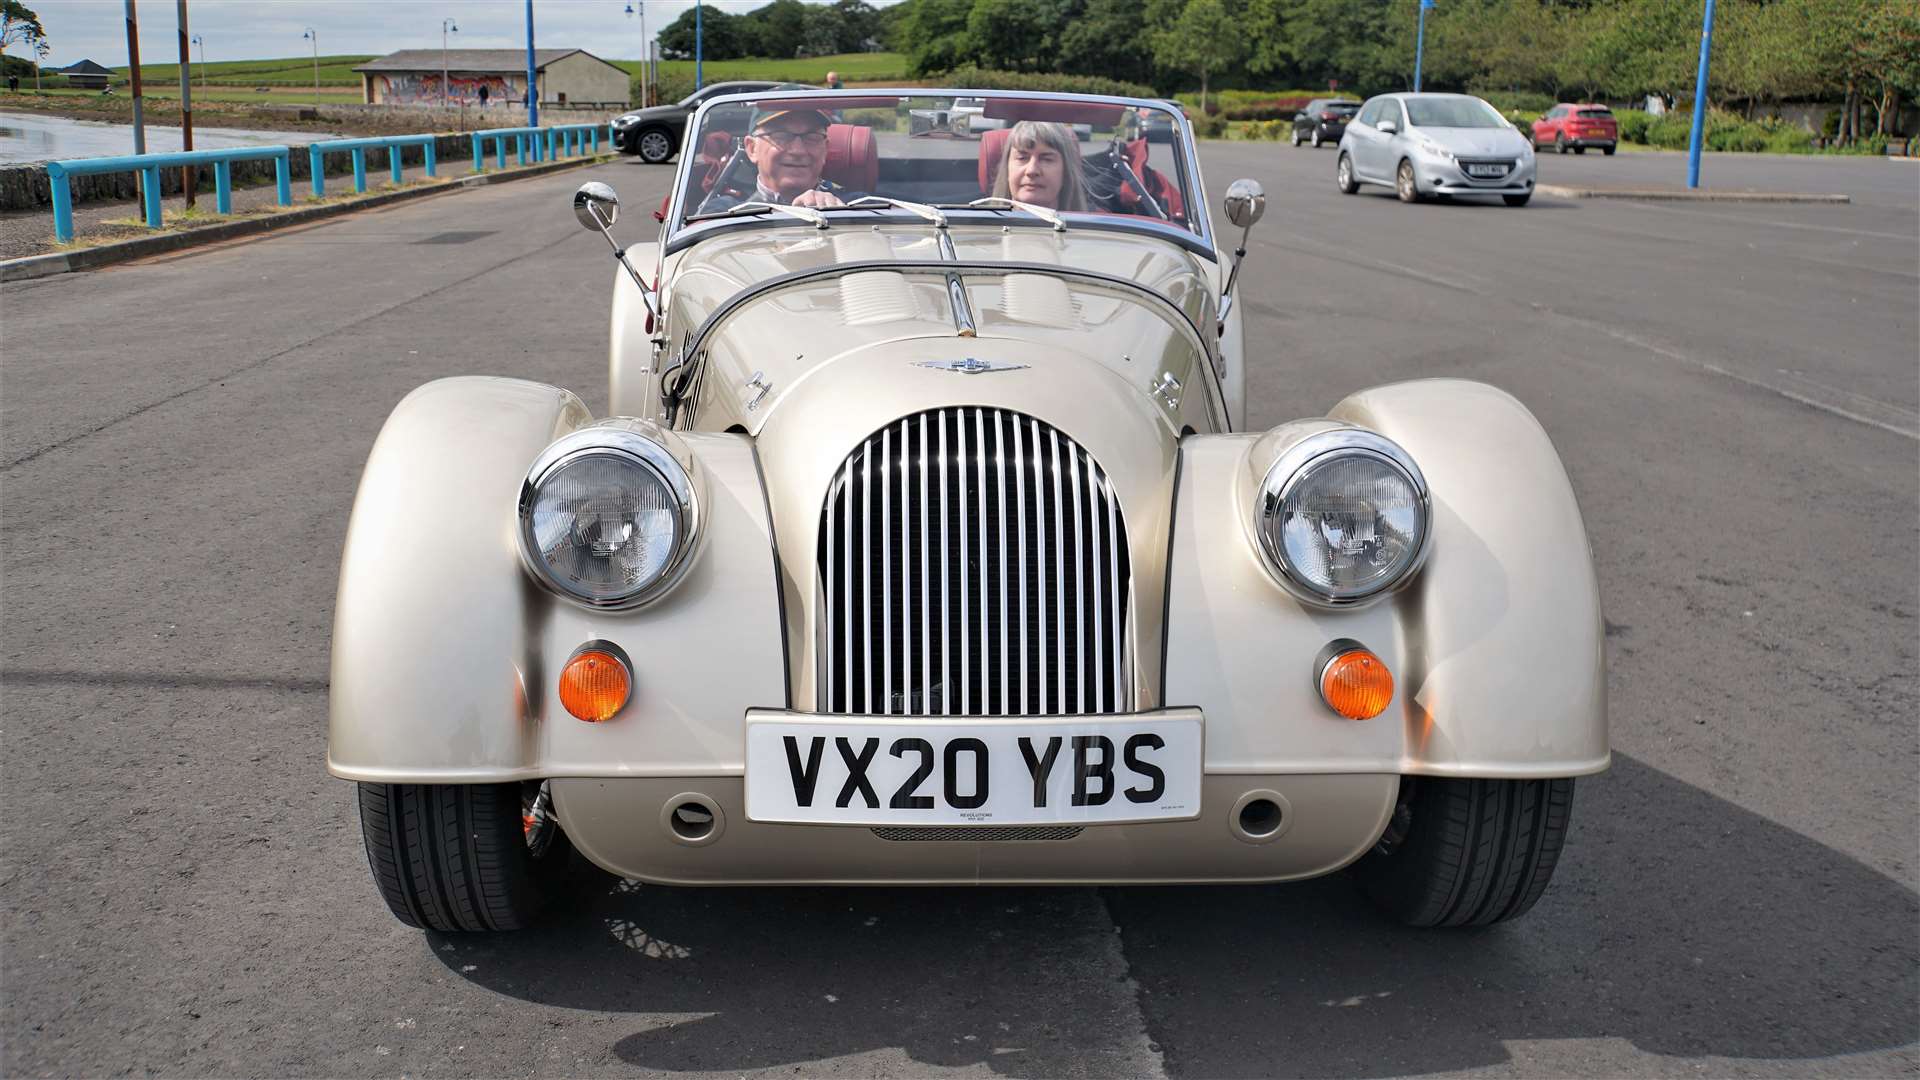 The Morgan may look old but it's brand new as can be seen by the numberplate. Pictures: DGS